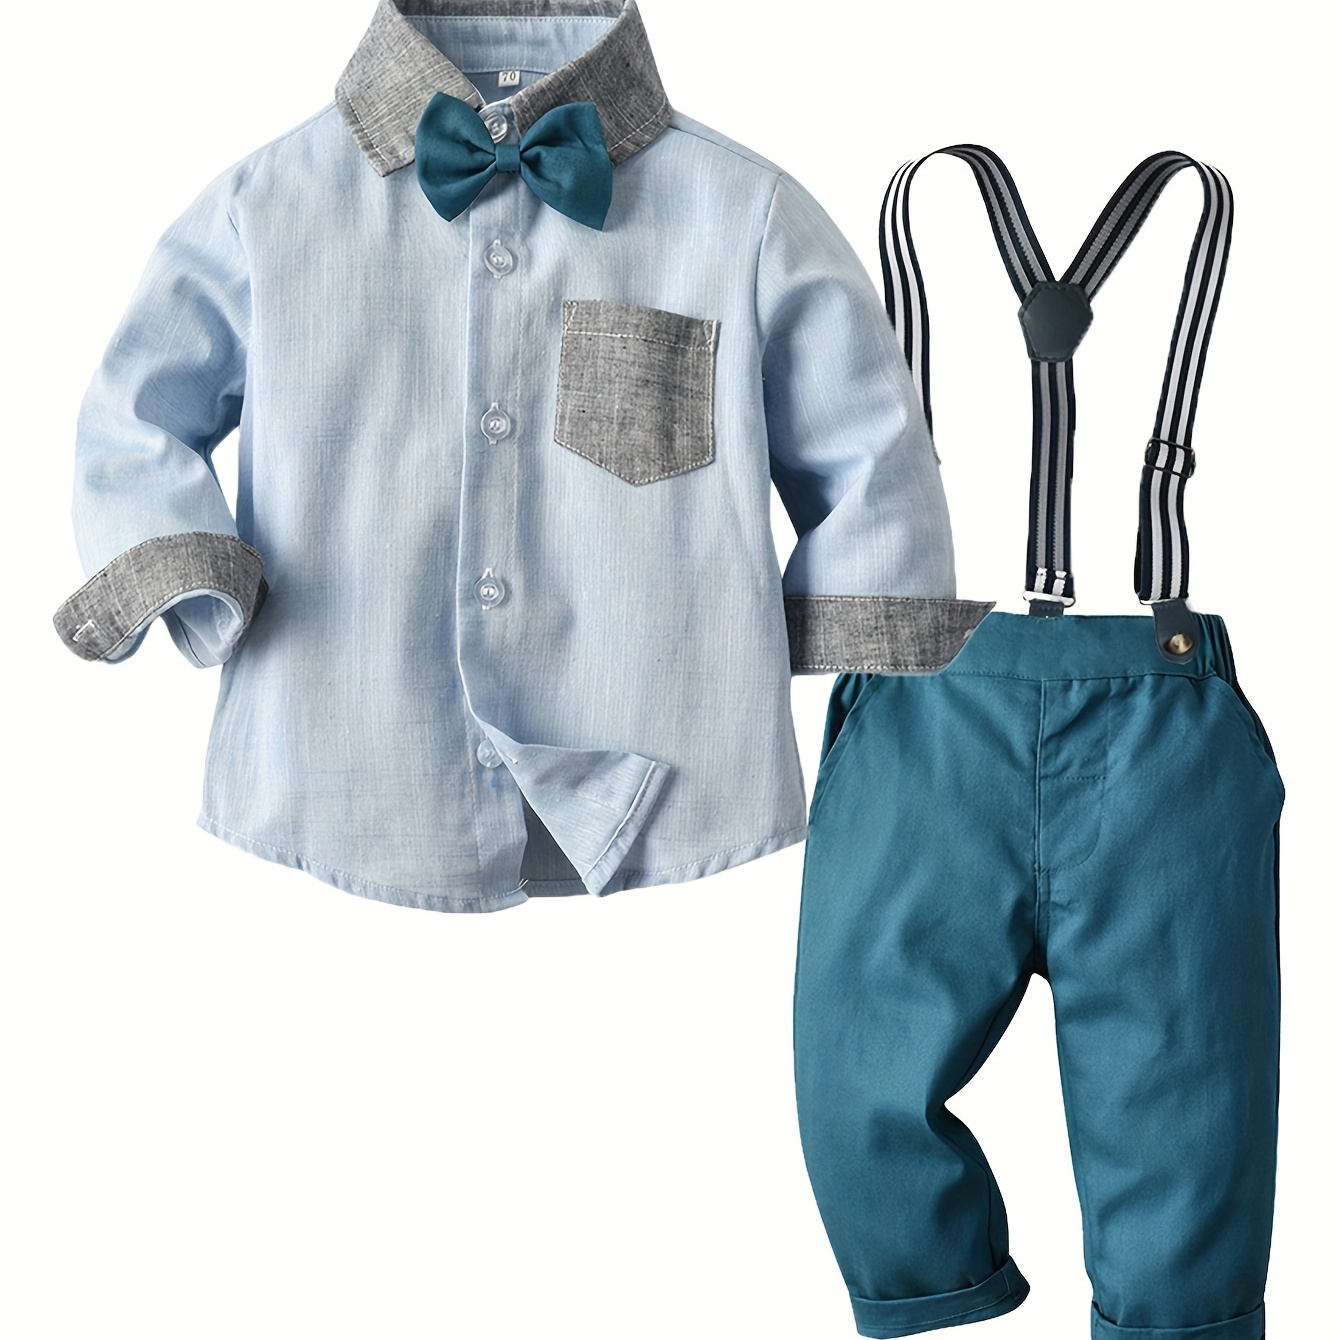 

2pcs Boy's Preppy Style Outfit, Bowtie Shirt & Overall Pants Set, Formal Wear For Speech Performance Birthday Party, Kid's Clothes